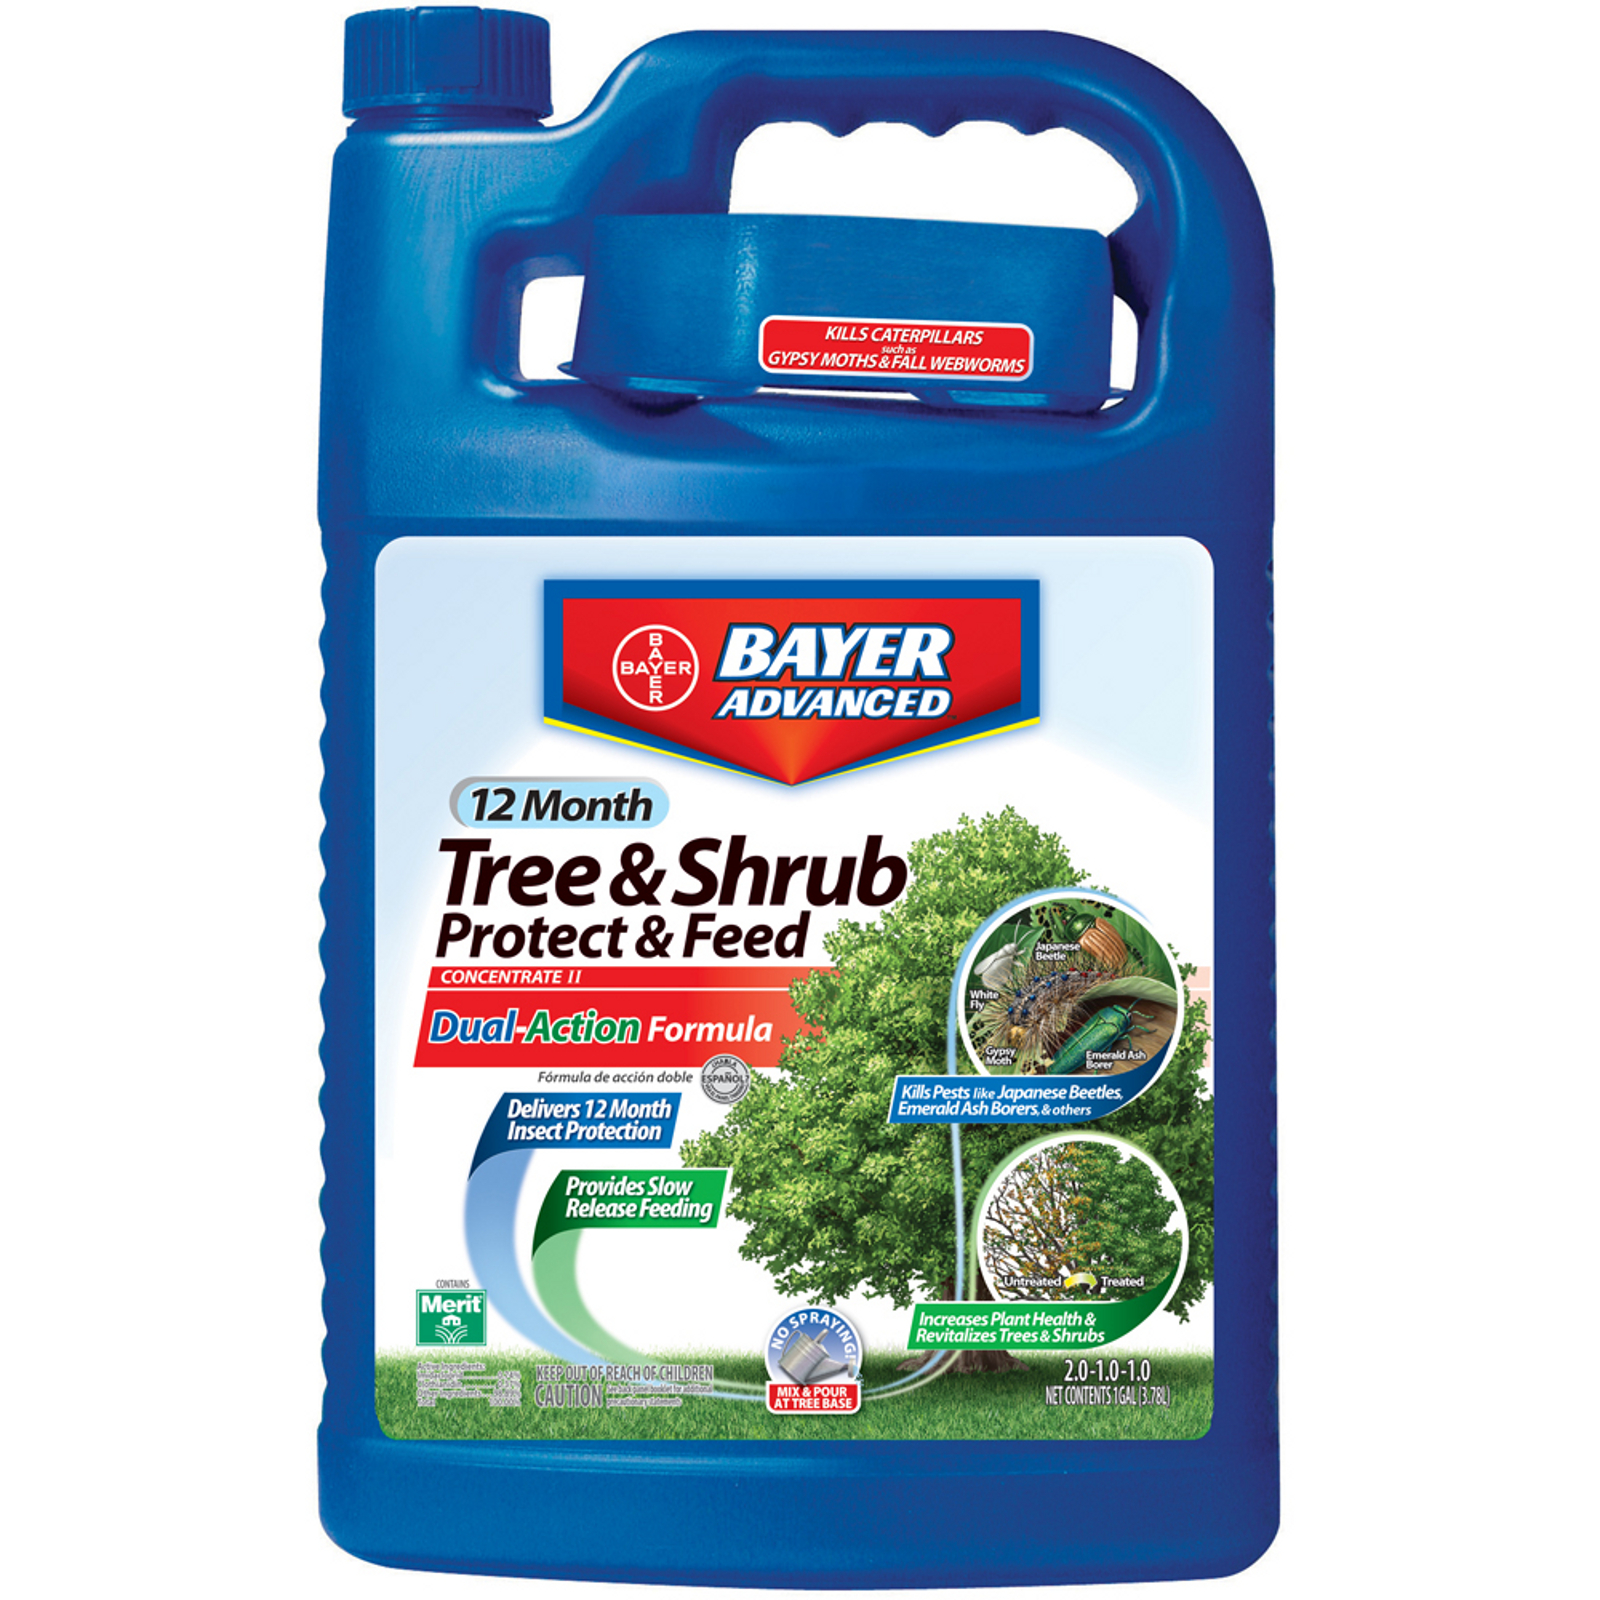 Bayer BAY701615A Gal 12 Month Tree & Shrub Protect & Feed